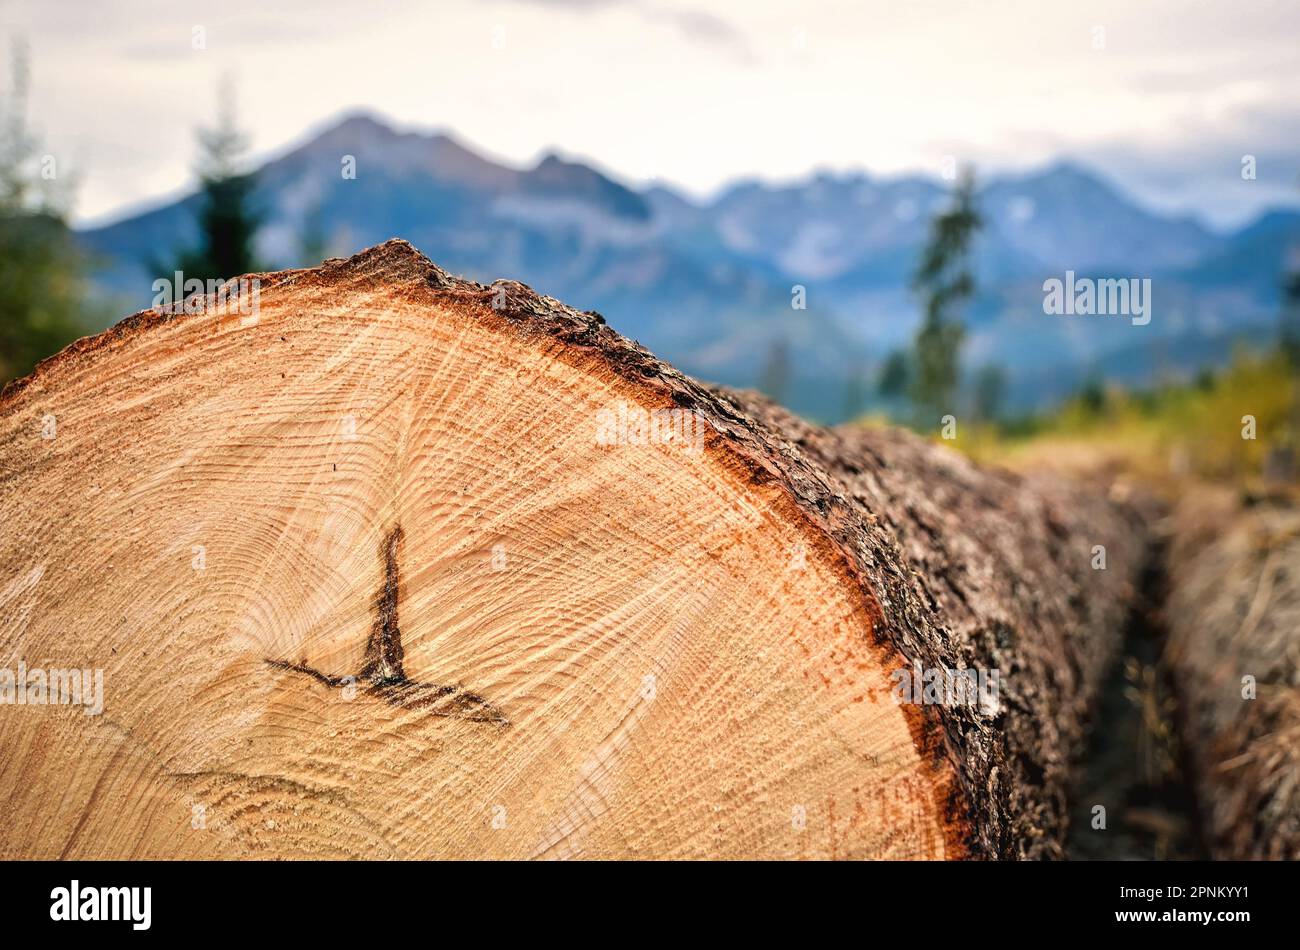 Tree trunk in mountains, a chopped off tree showing annual rings. Wood felling in the Tatra National Park, Poland. Stock Photo